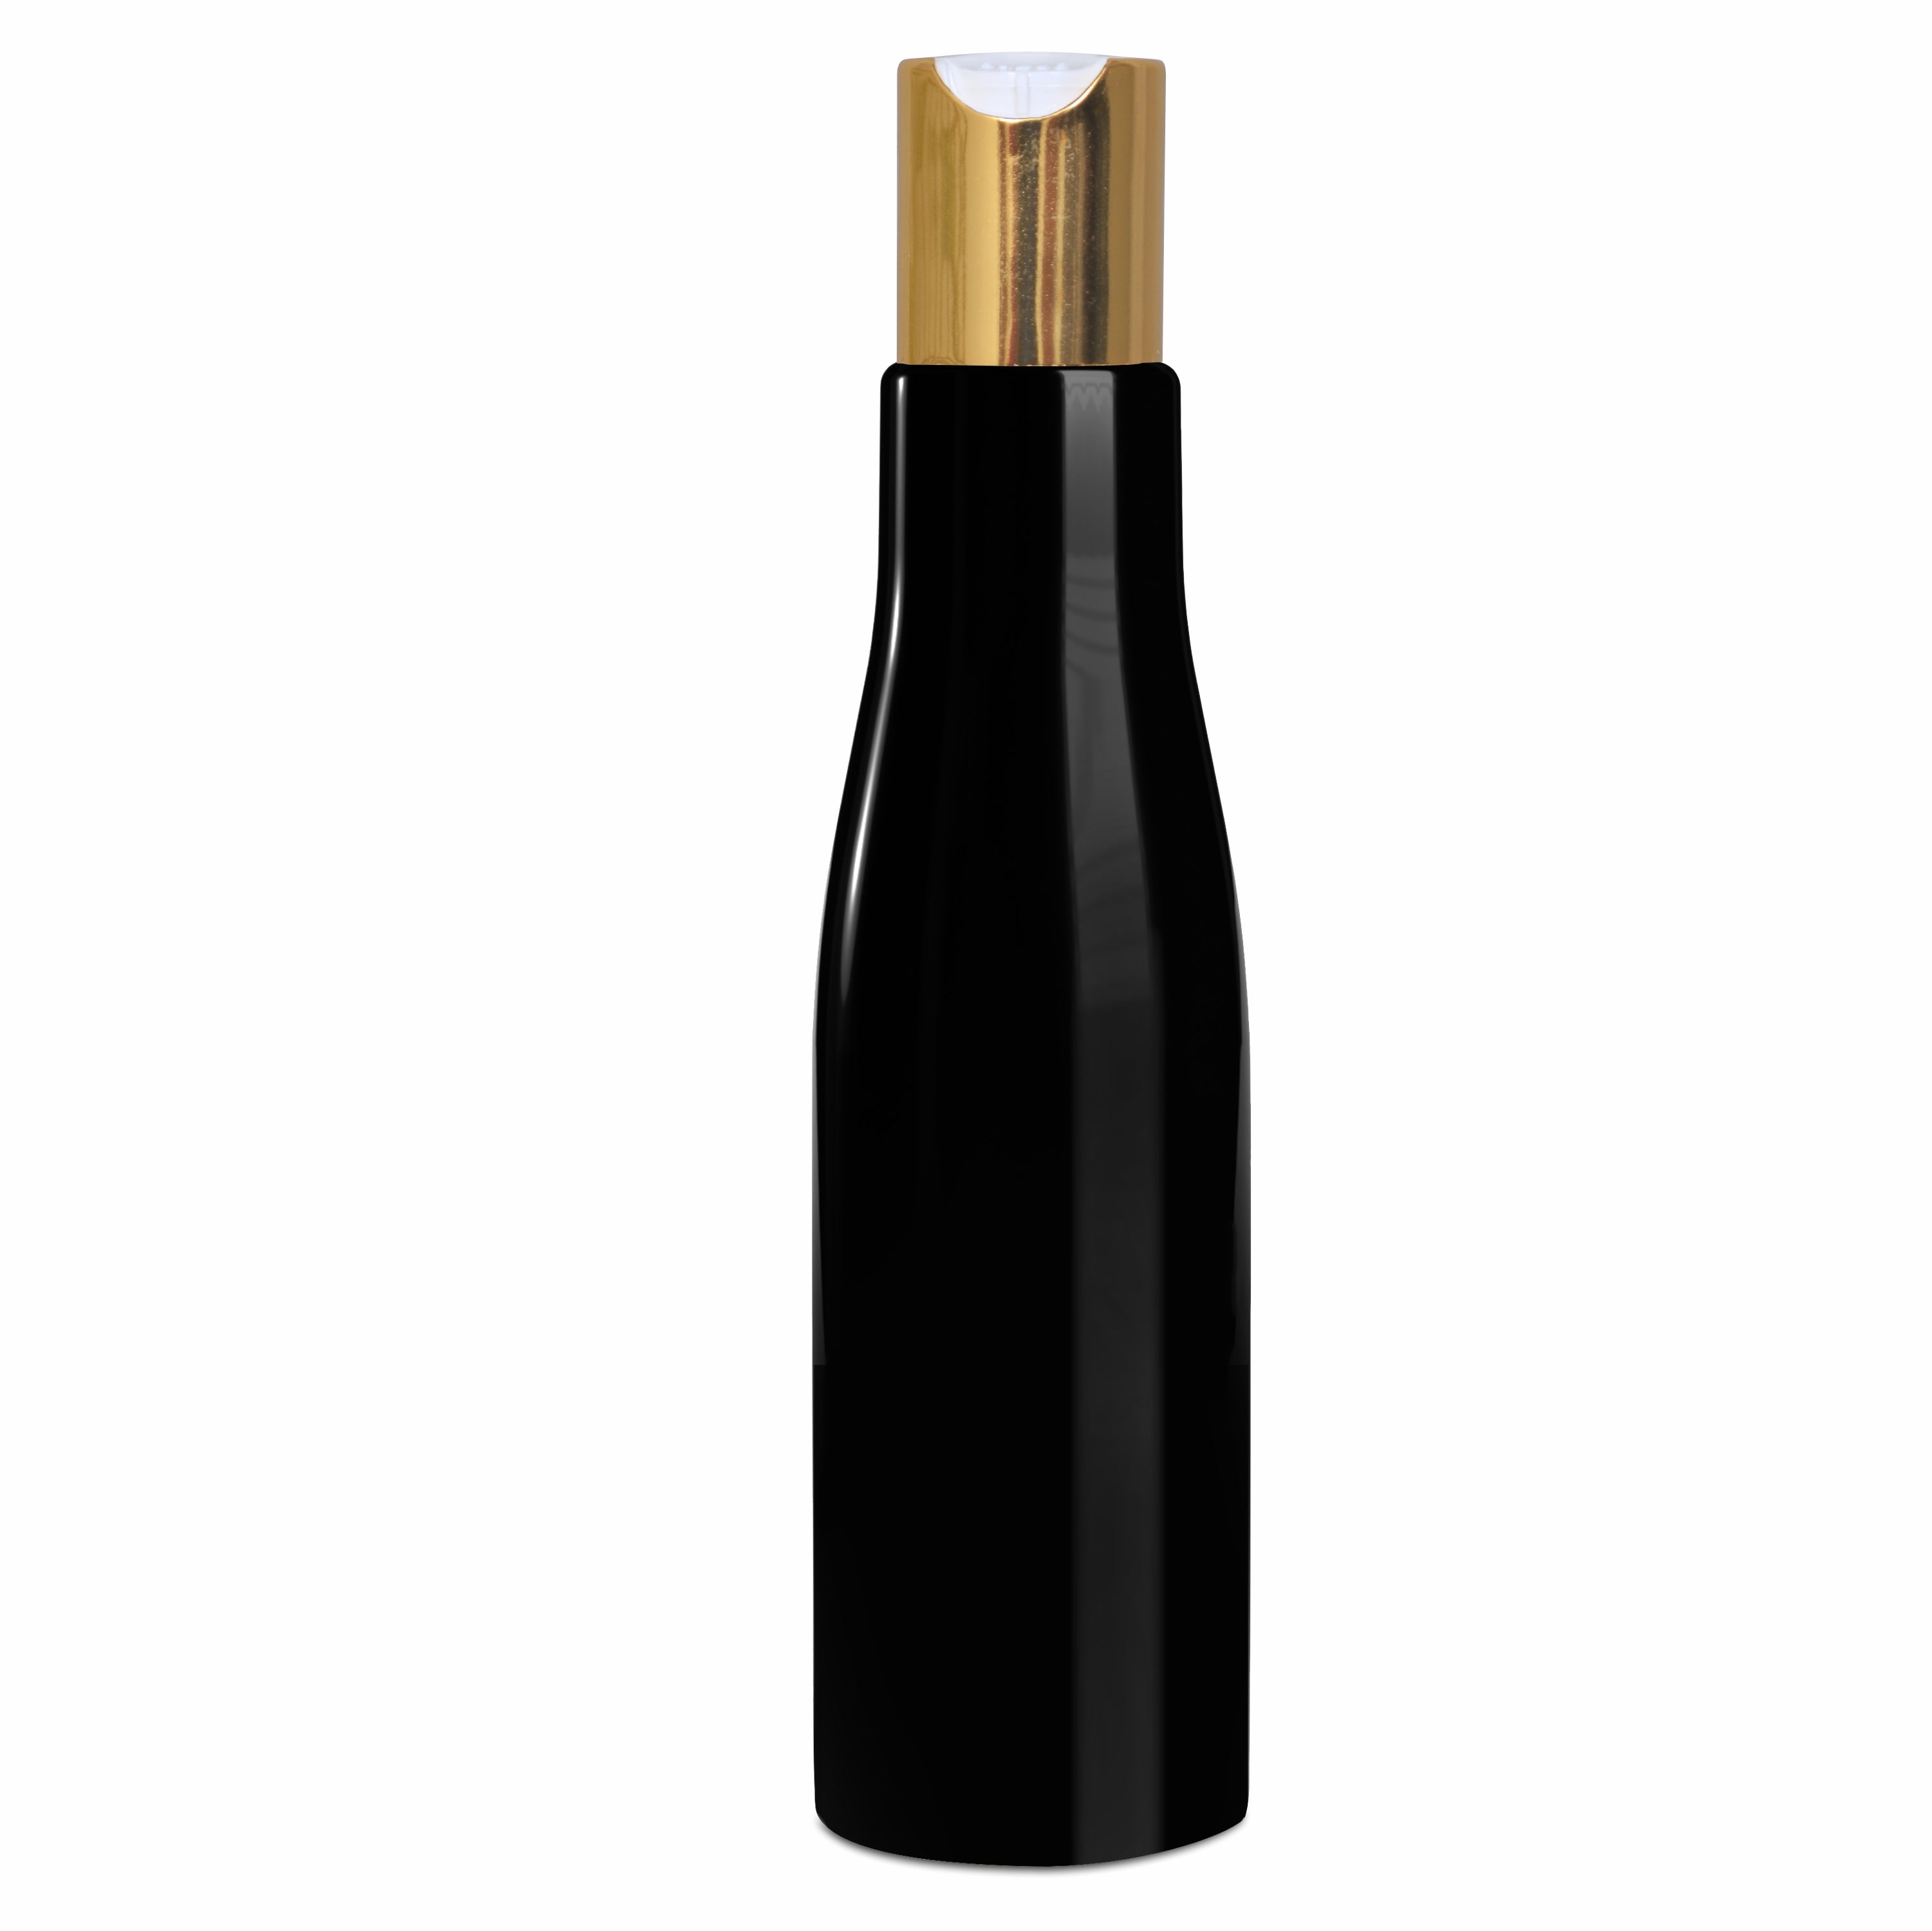 ZMK28 | BLACK COLOR ASTA BOTTLE WITH GOLD PLATED DISKTOP CAP | 200ML |